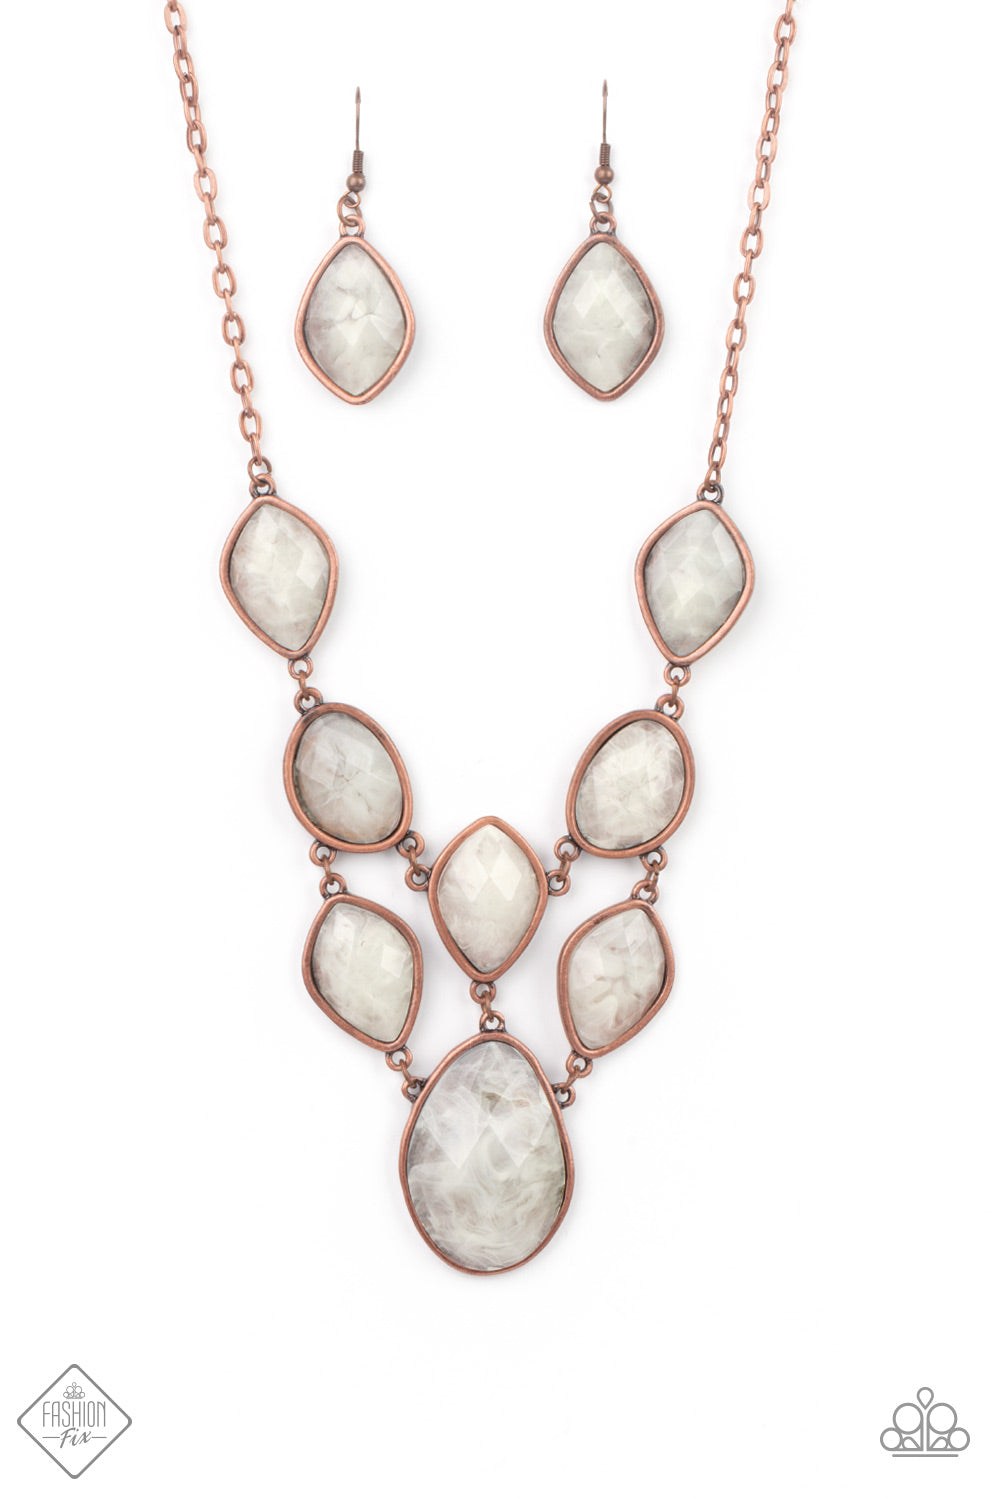 Paparazzi Accessories- Featuring faceted surfaces, a collection of cloudy faux stone beads are pressed into rustic copper frames as they link into a mystical netted display below the collar. 